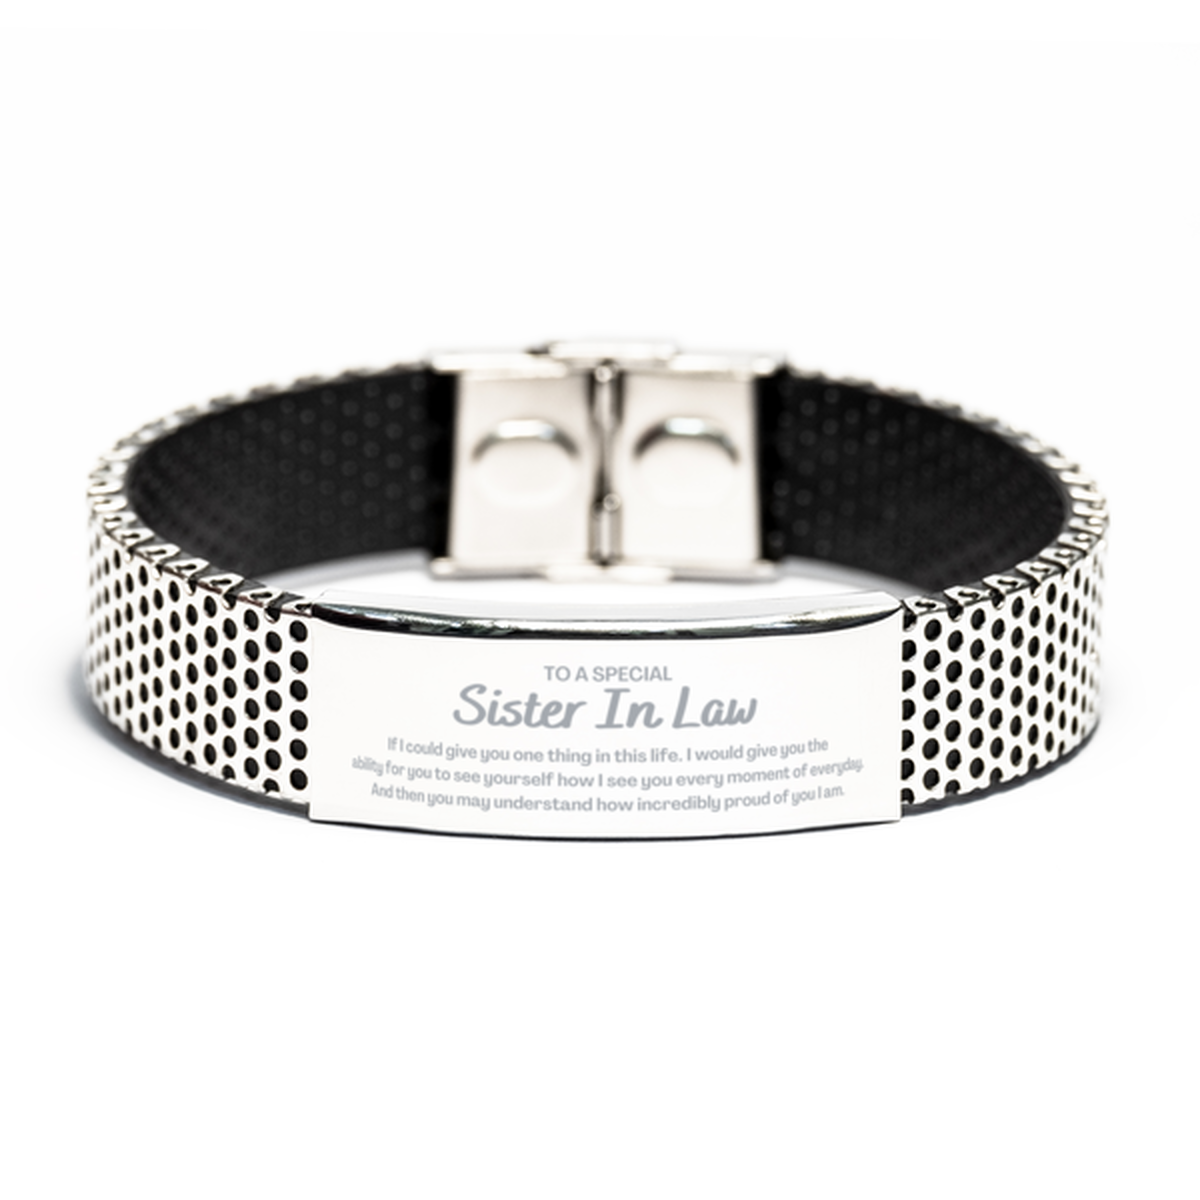 To My Sister In Law Stainless Steel Bracelet, Gifts For Sister In Law Engraved, Inspirational Gifts for Christmas Birthday, Epic Gifts for Sister In Law To A Special Sister In Law how incredibly proud of you I am